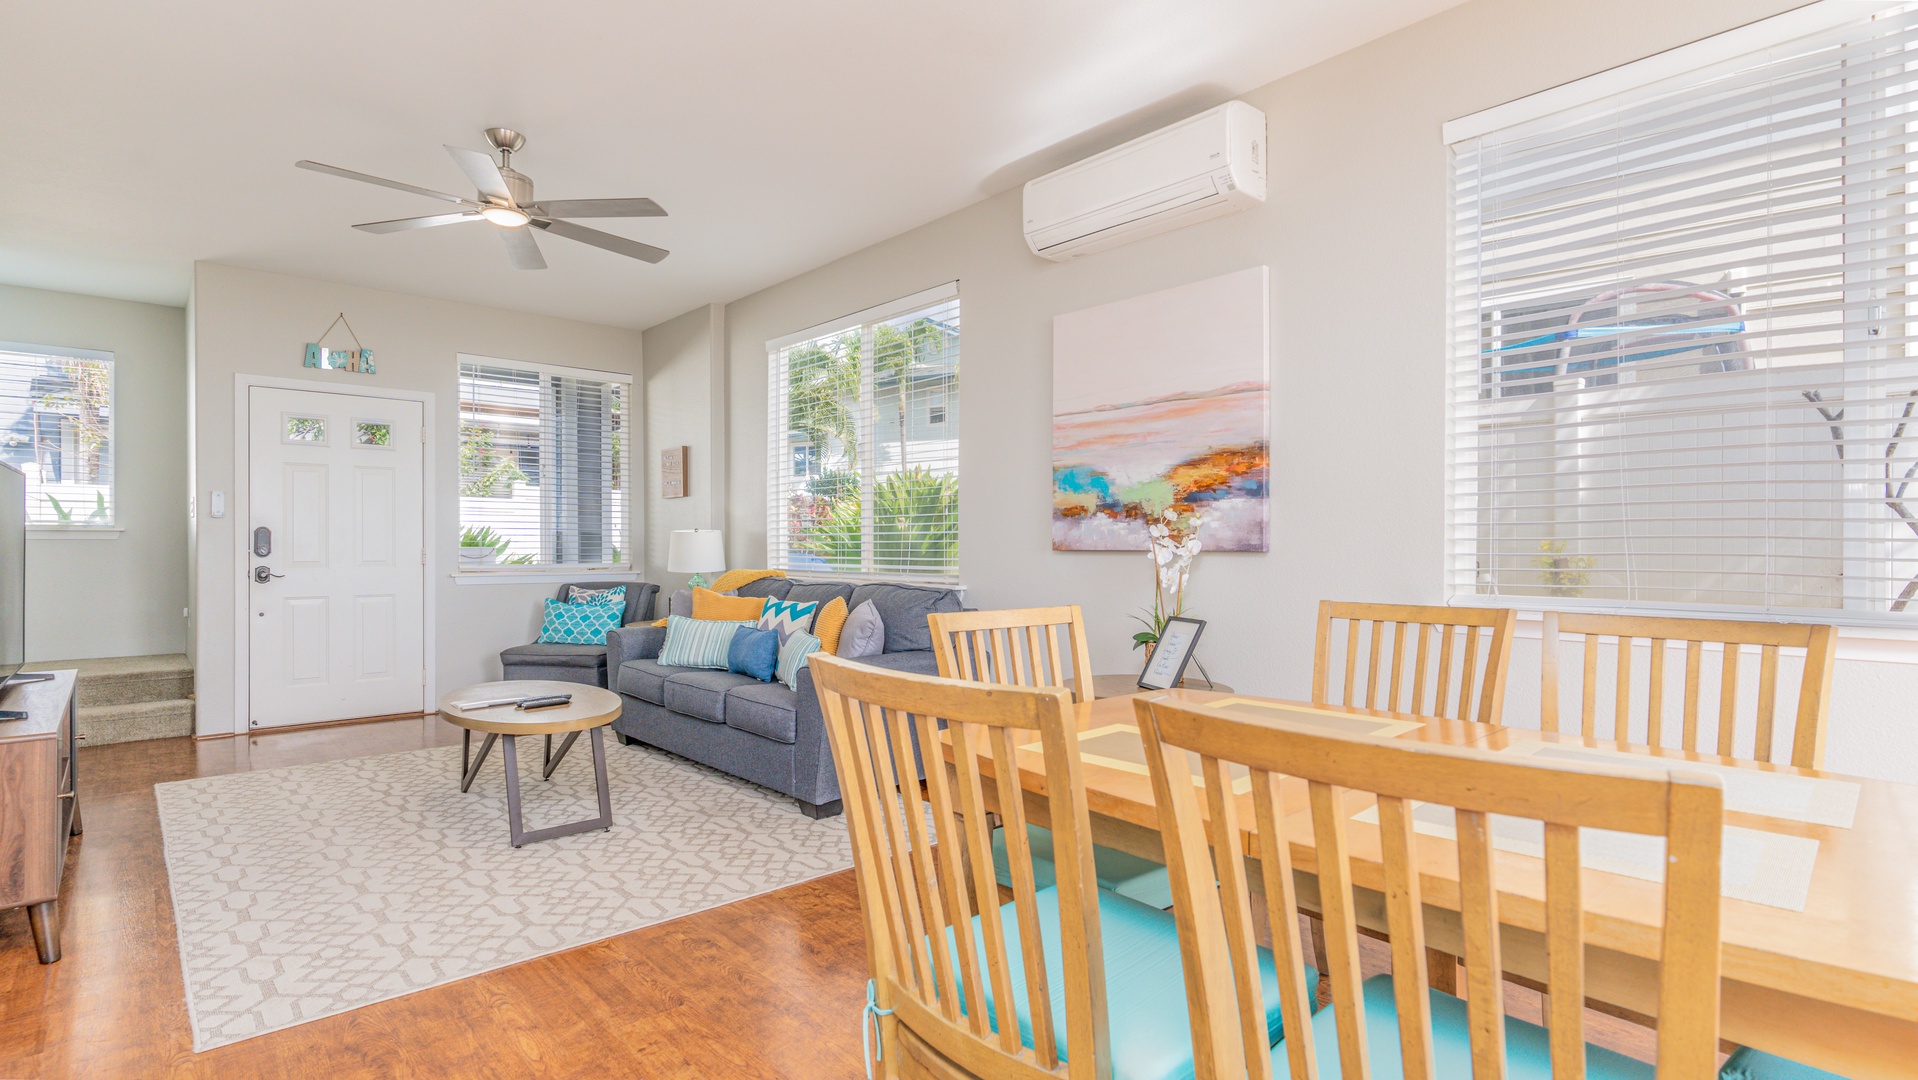 Kapolei Vacation Rentals, Makakilo Elele 48 - Dining area conveniently located right off the living space.